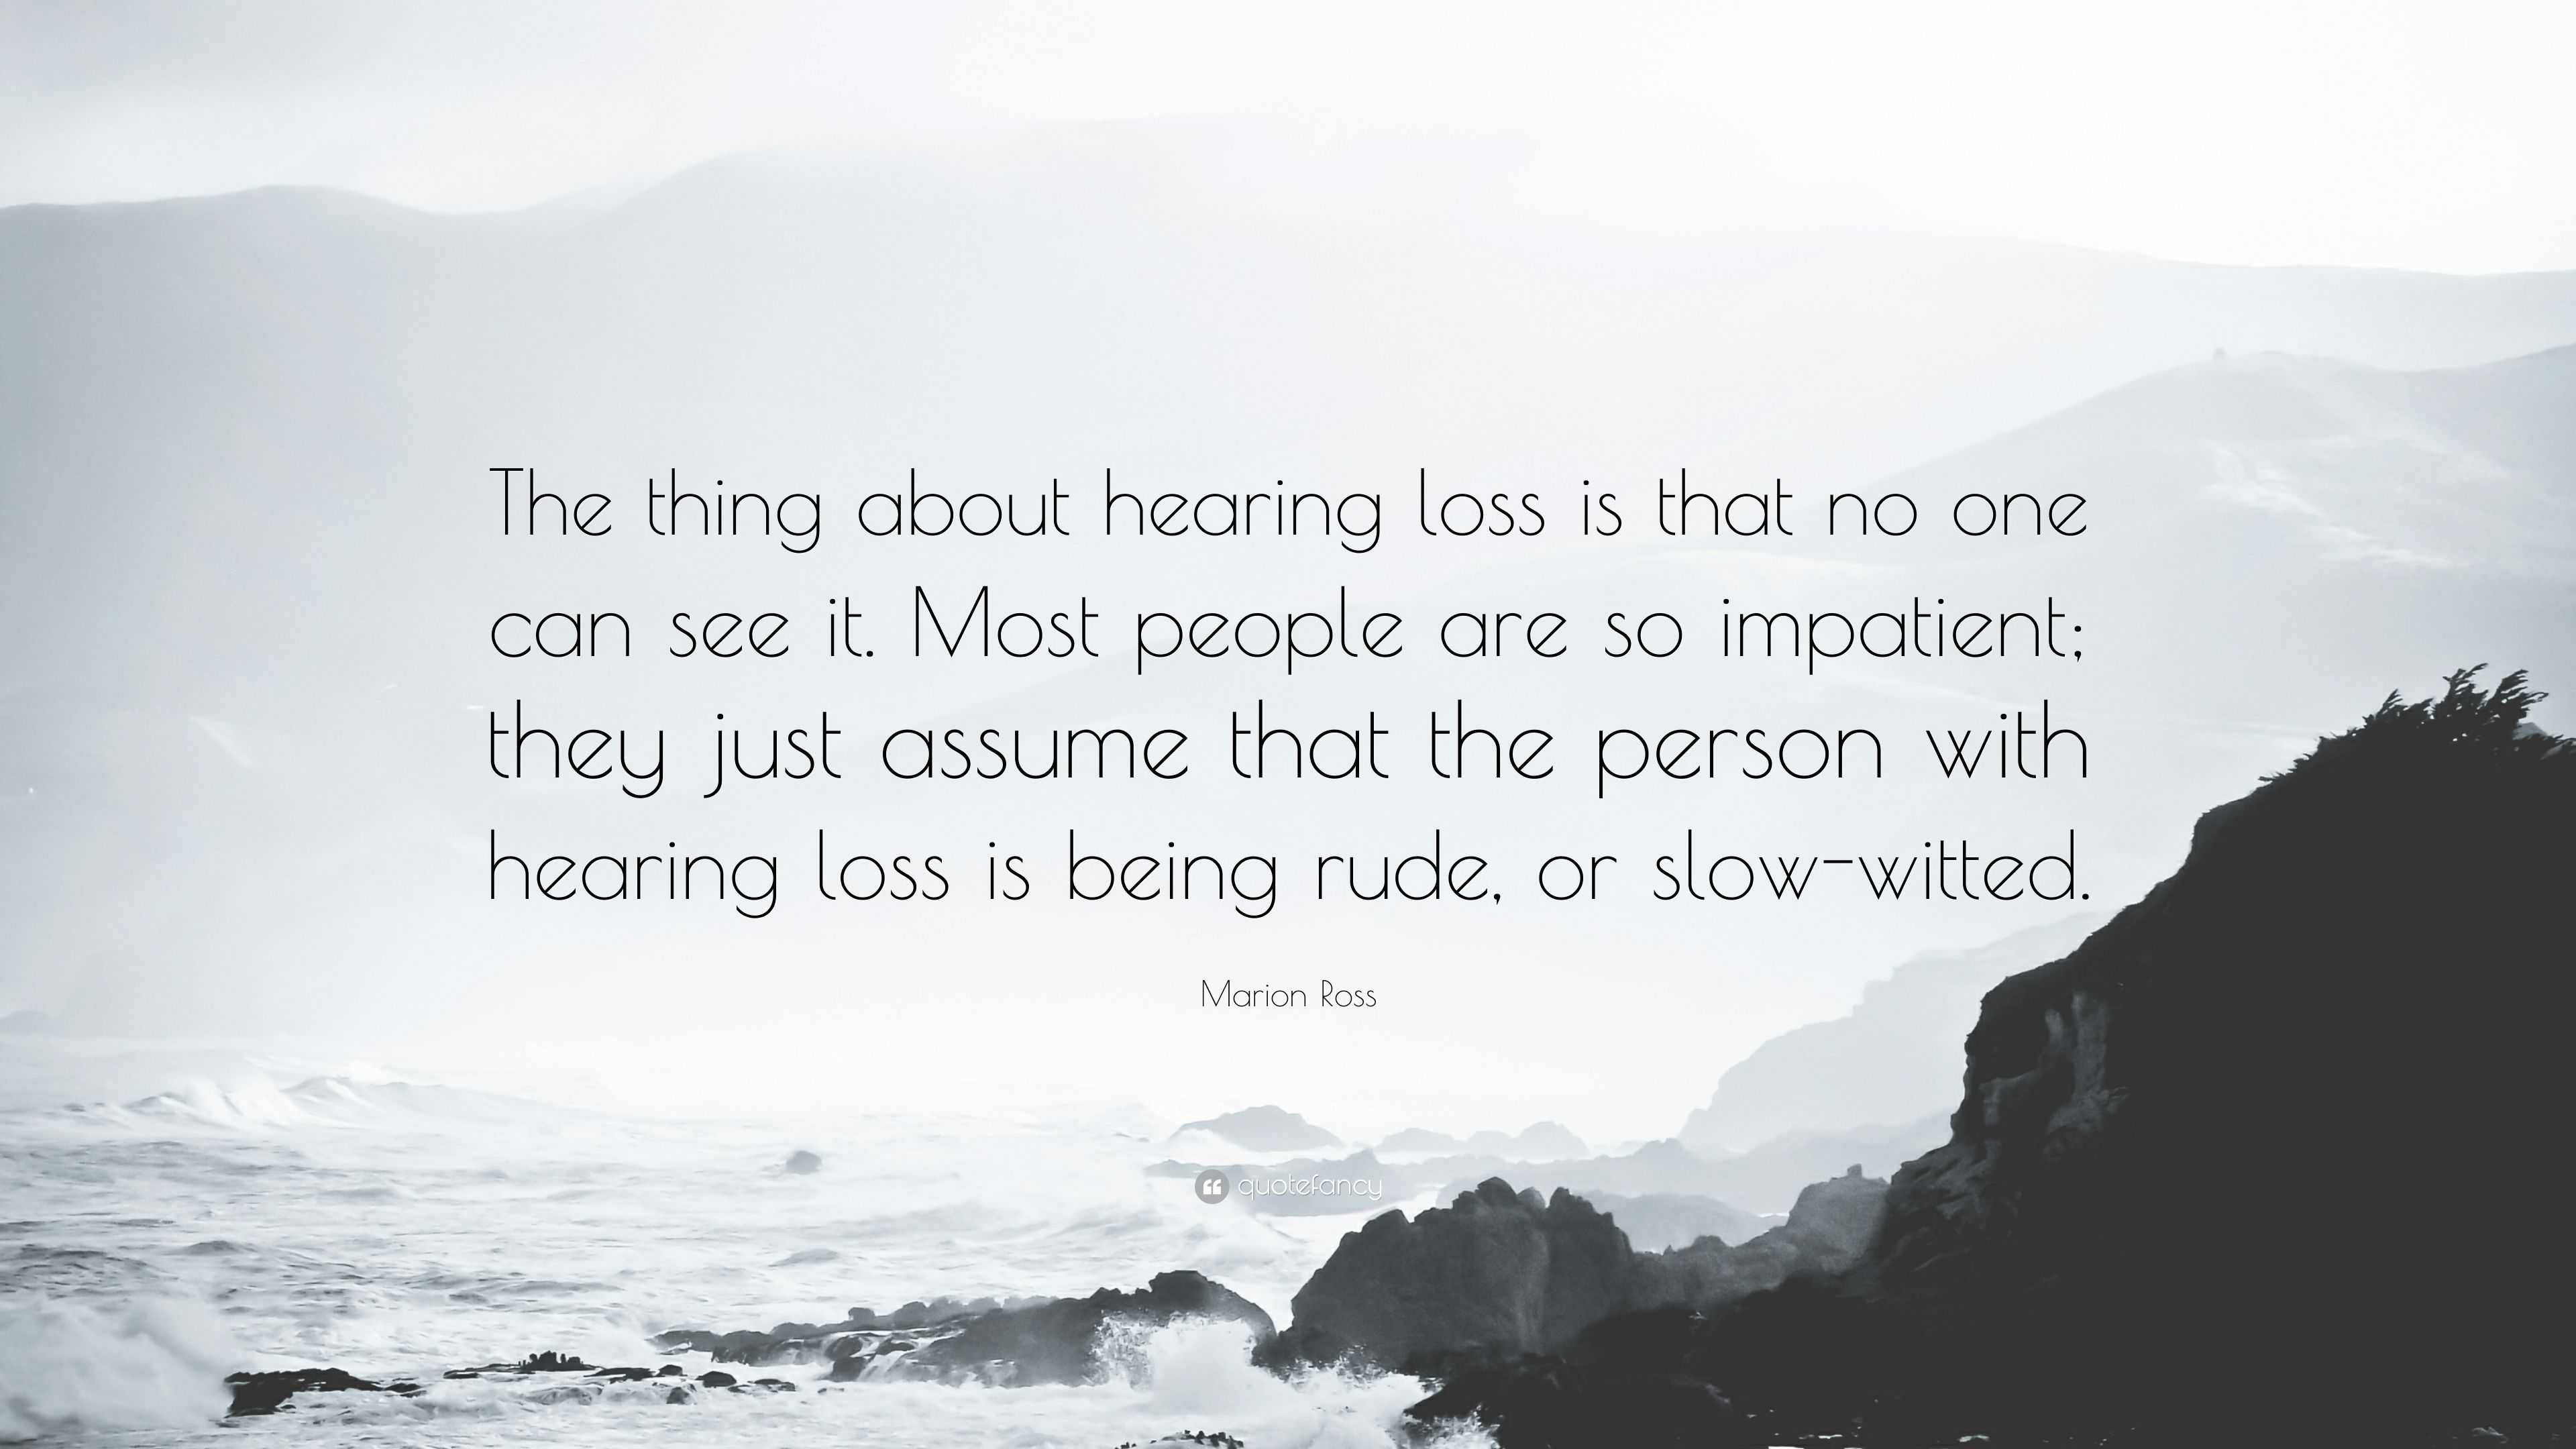 Marion Ross Quote: “The thing about hearing loss is that no one can see ...